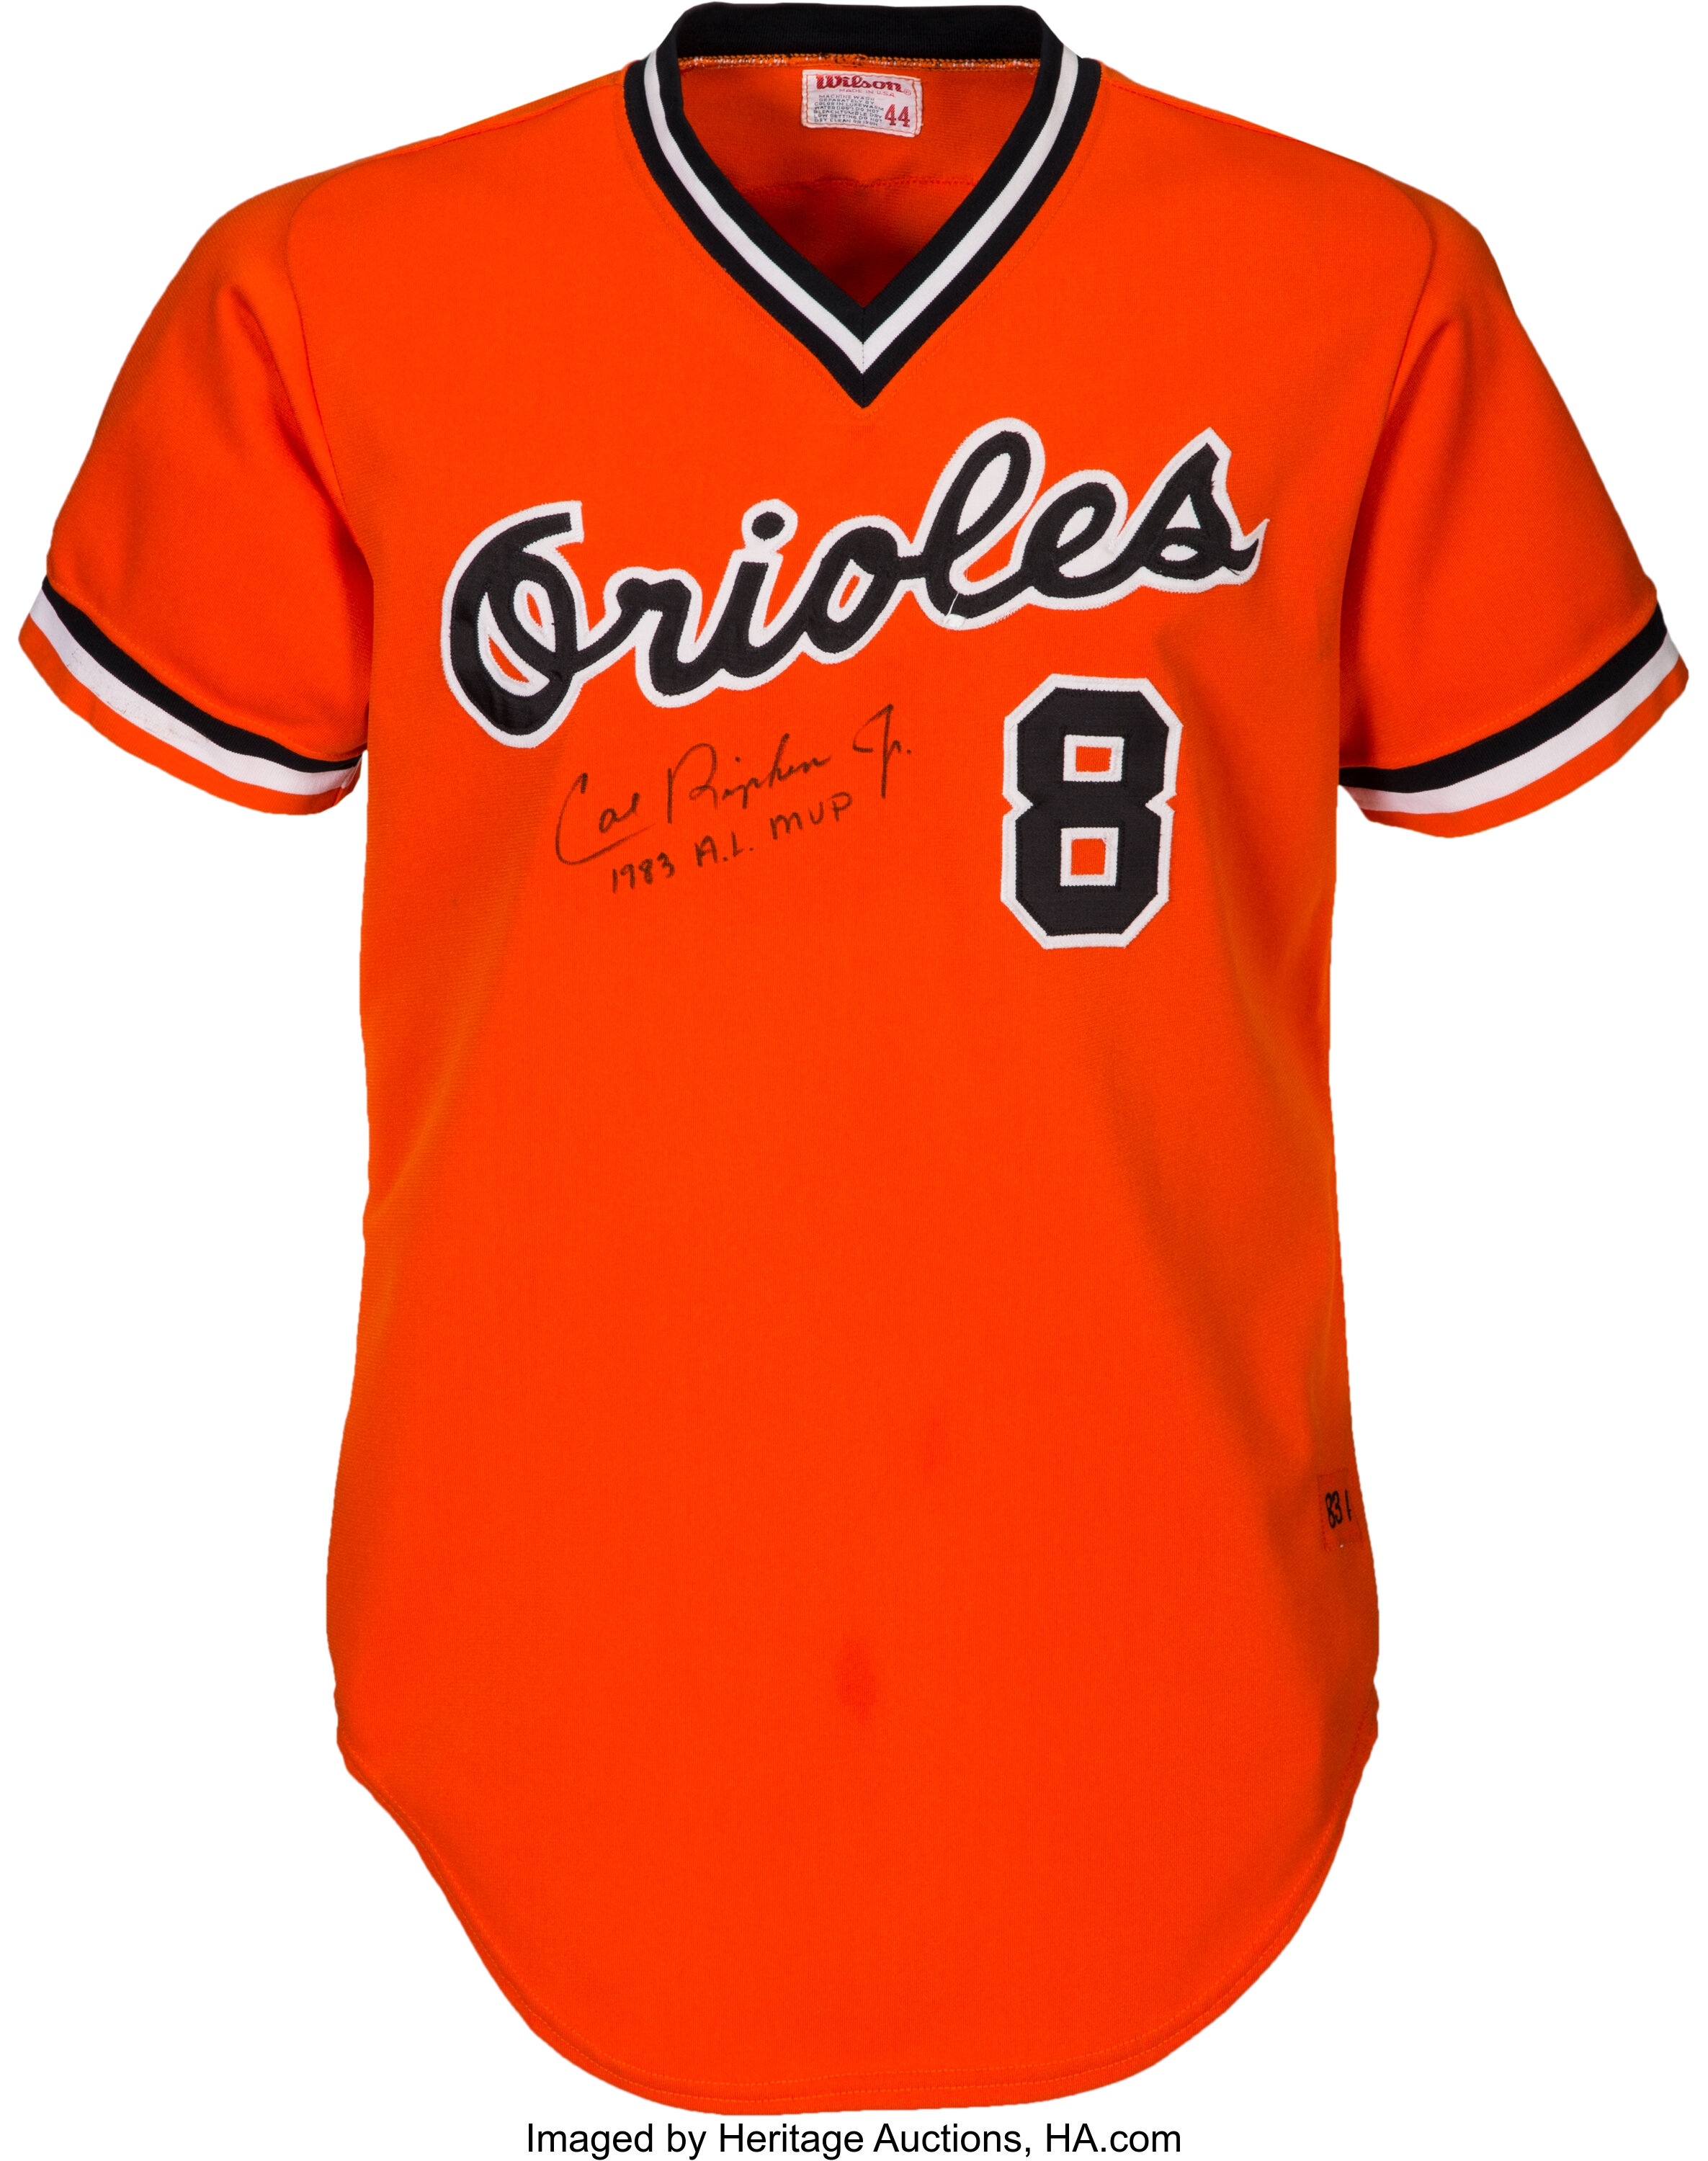 1999 Cal Ripken Jr. Game Used & Signed Baltimore Orioles Road Jersey  (Ripken LOA), Sotheby's & Goldin Auctions Present: A Century of Champions, 2020